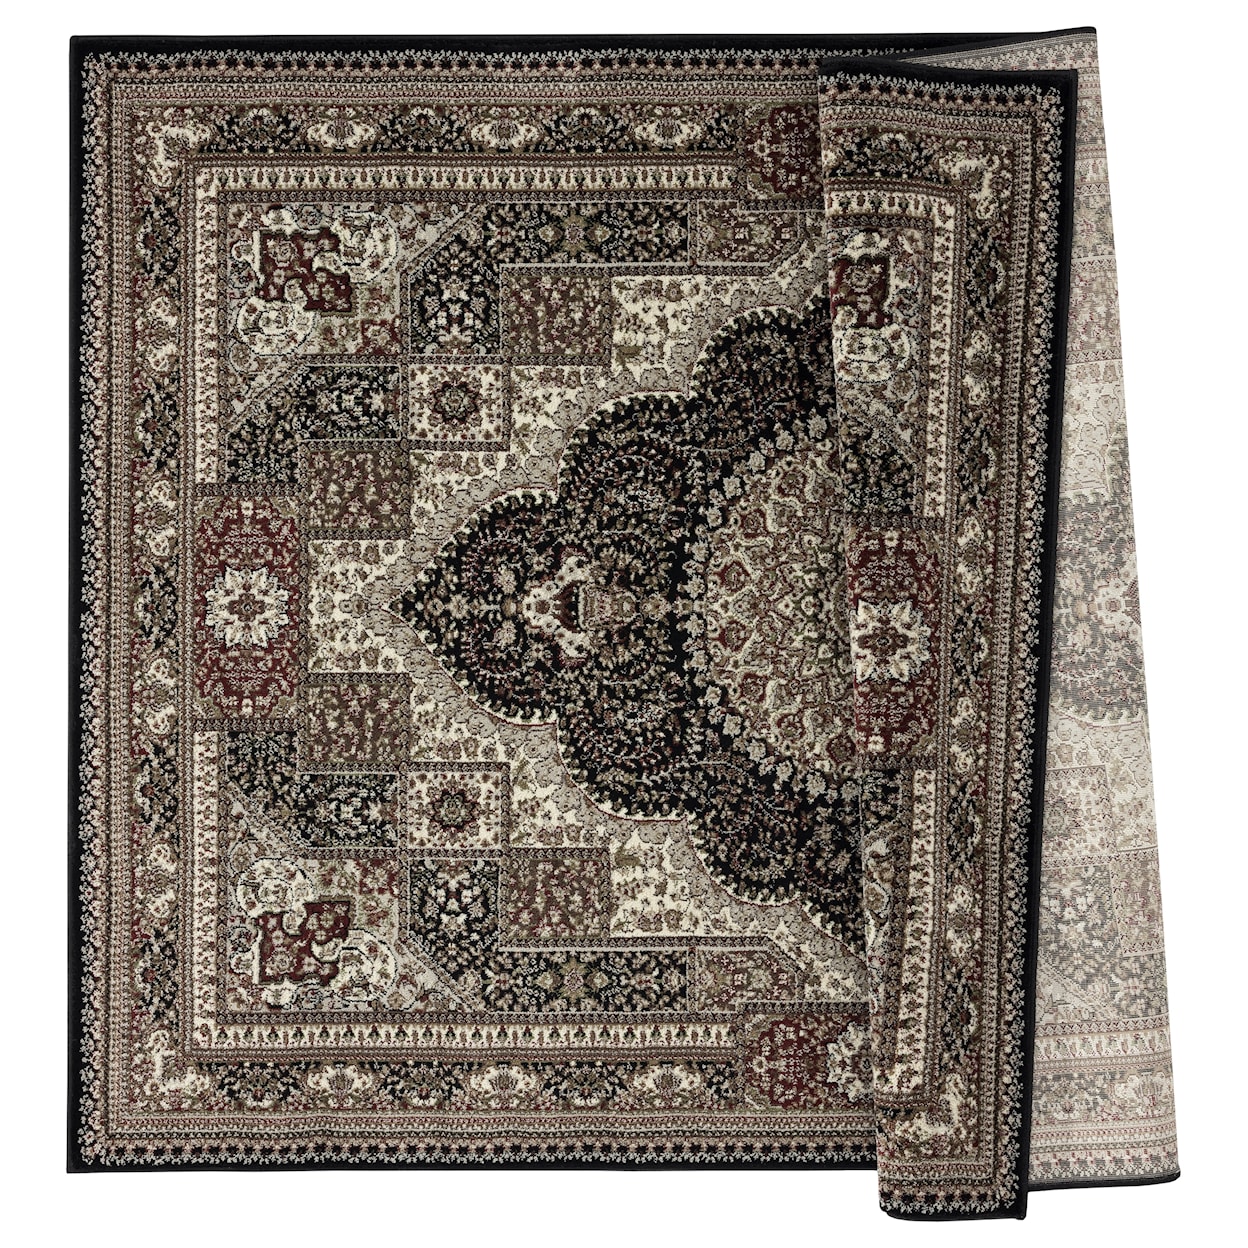 MDA Rugs Vaso Collection VASO RED BROWN ROUND 8X8 AREA RUG |